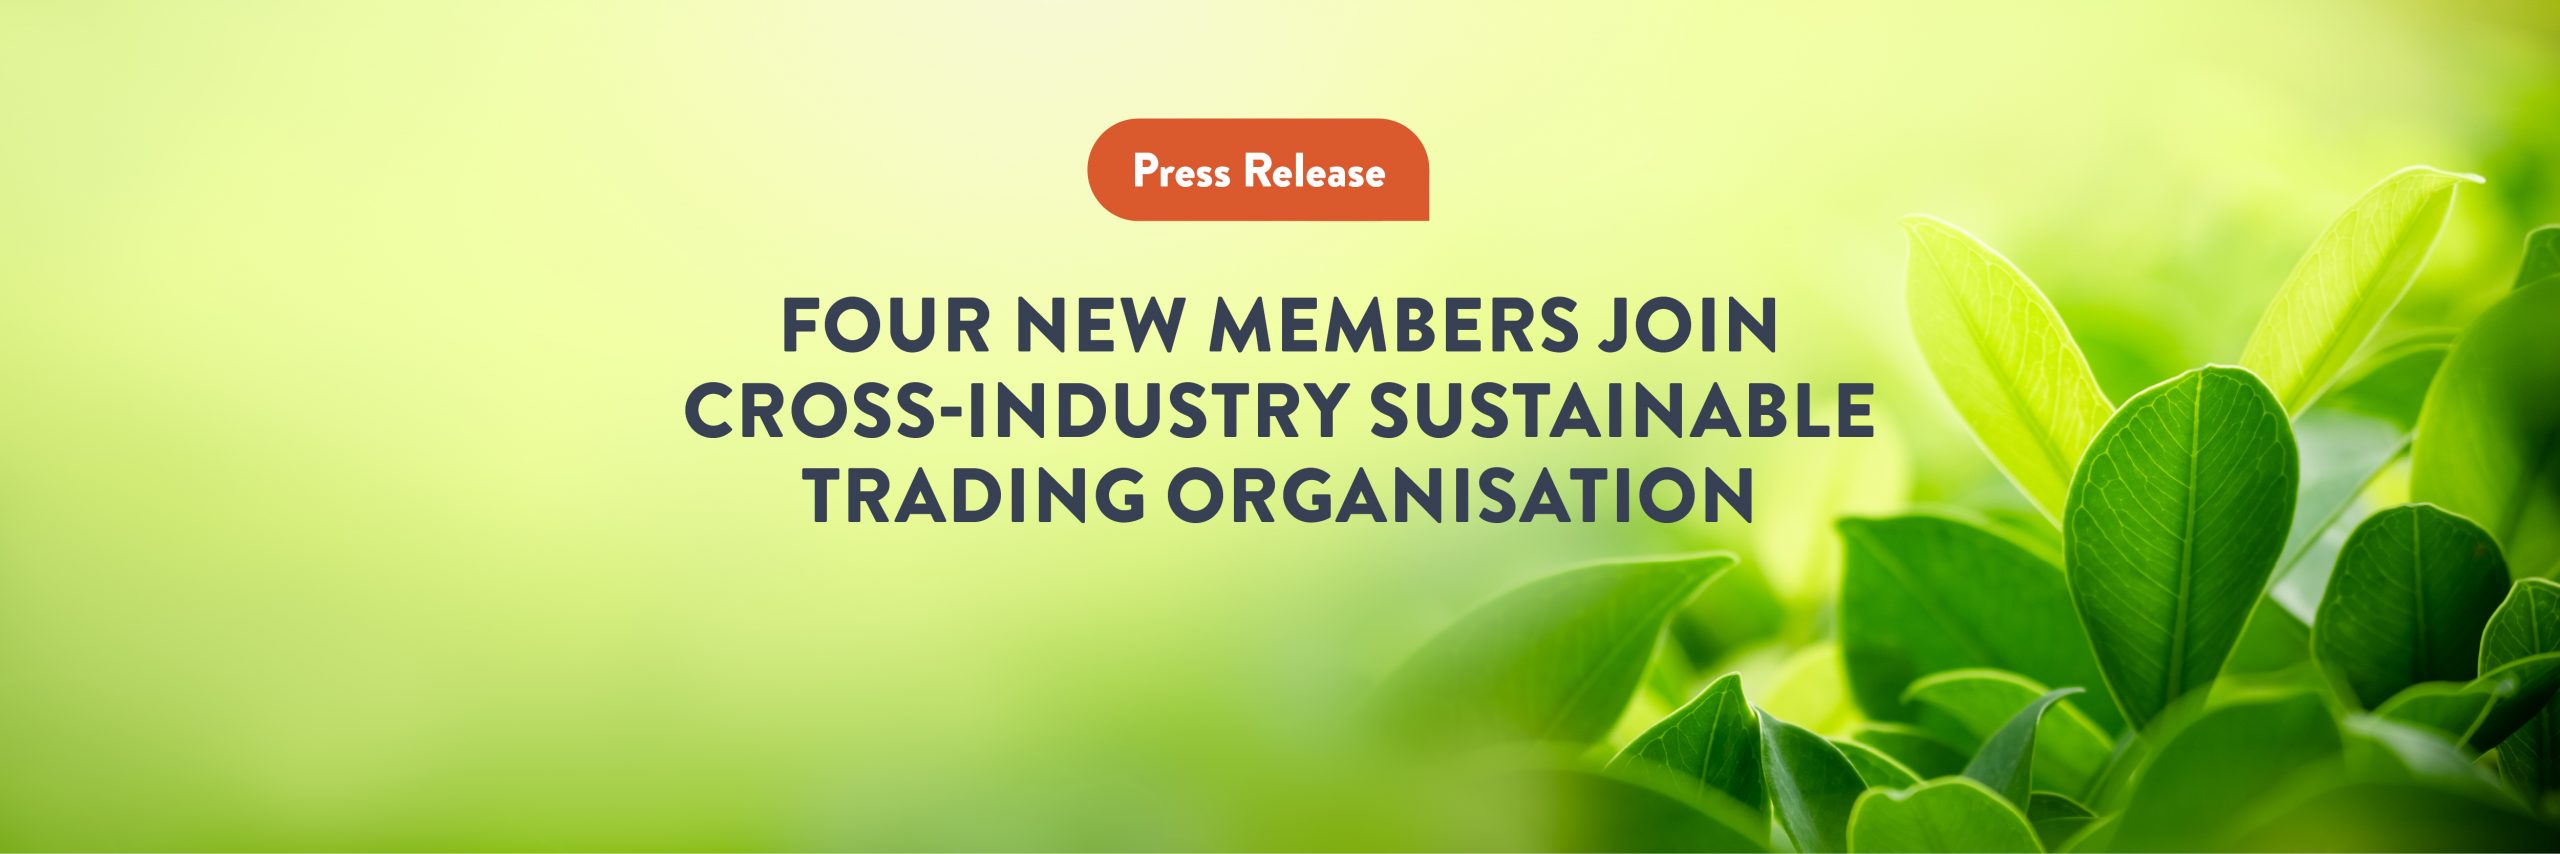 Press Release: Four new members join cross-industry Sustainable Trading organisation